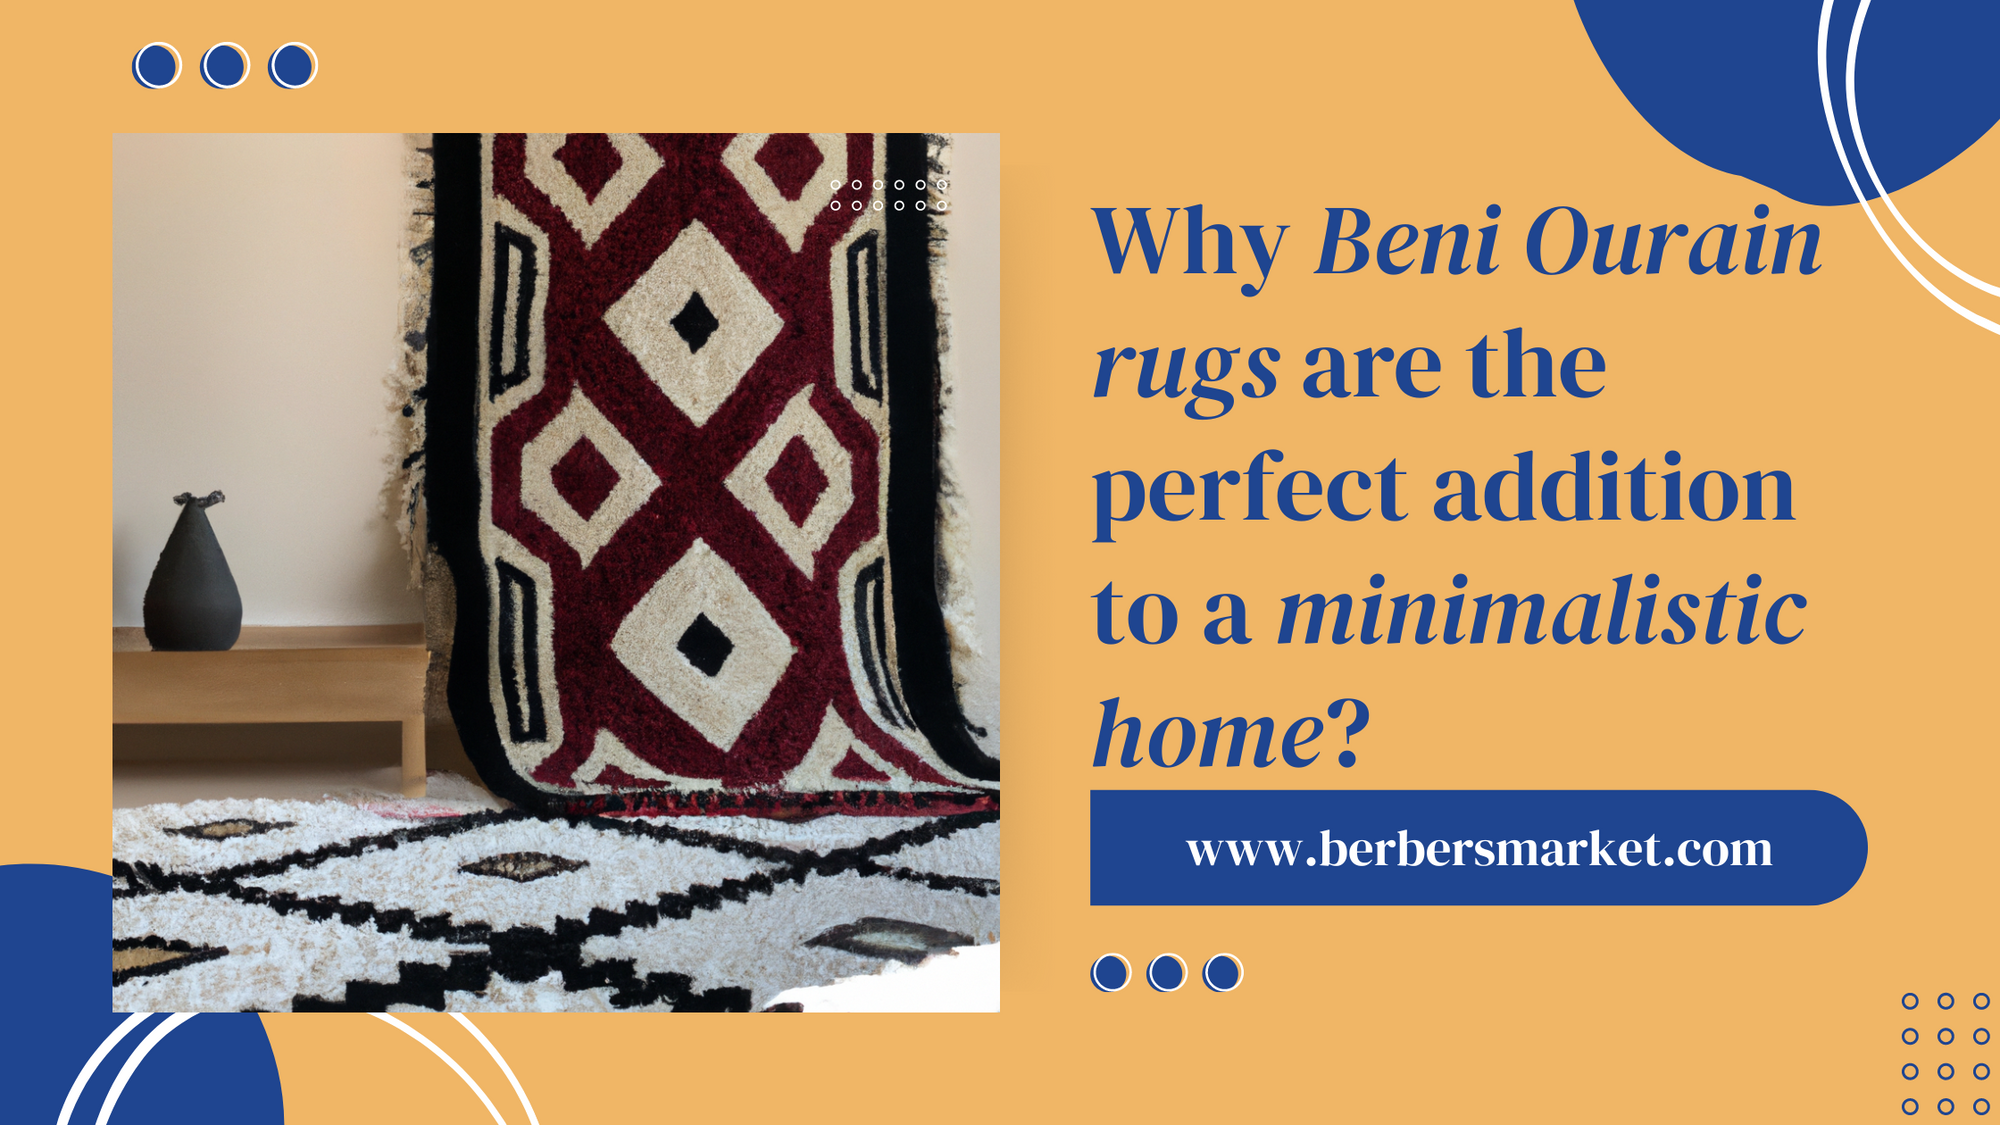 Blog banner for Why Beni Ourain rugs are the perfect addition to a minimalistic home